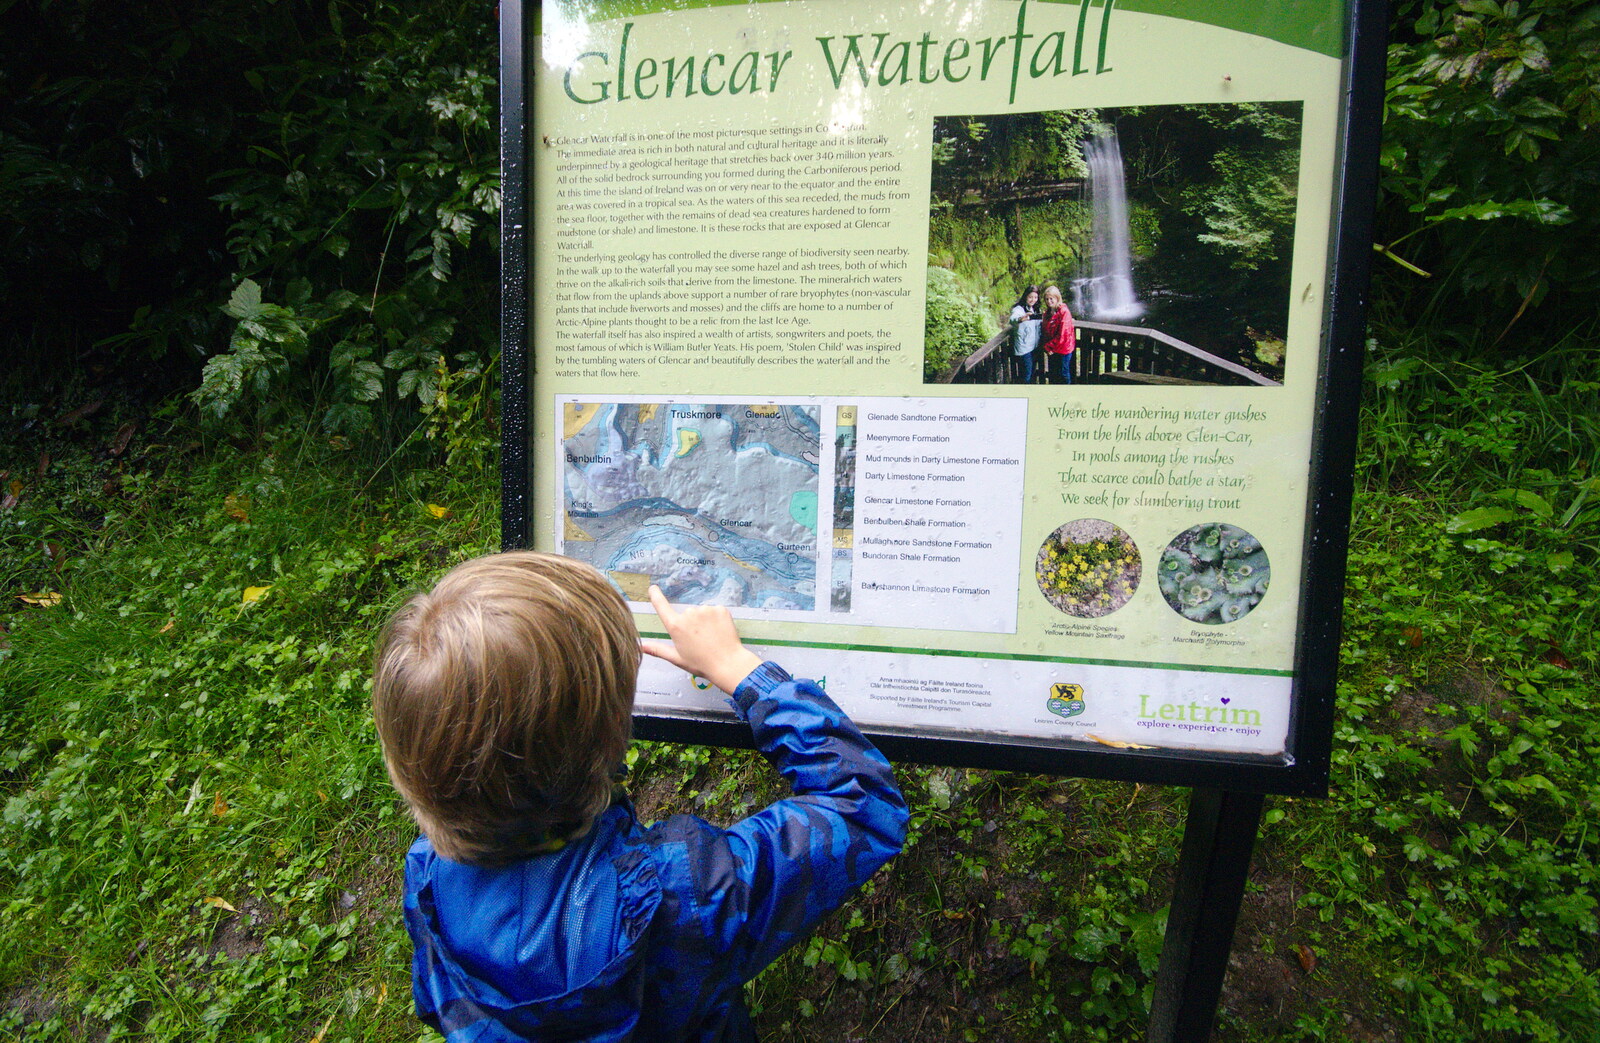 Harry inspects a sign from Glencar Waterfall and Parke's Castle, Kilmore, Leitrim, Ireland - 18th August 2019